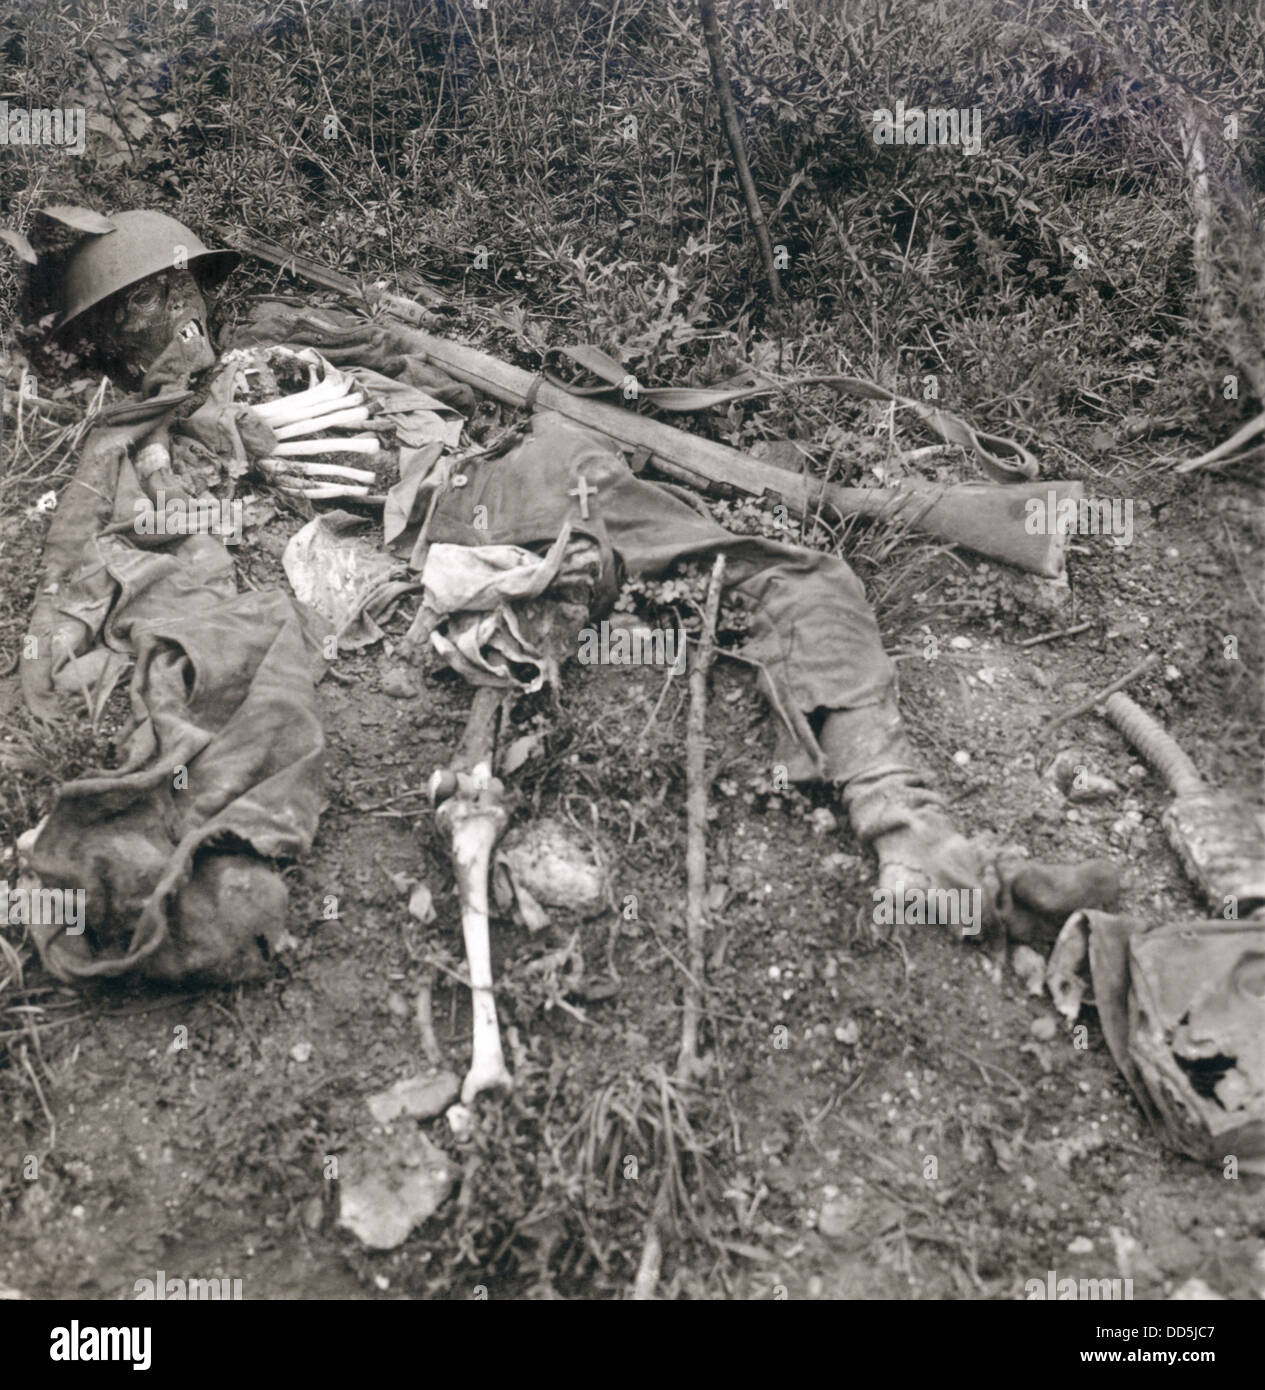 World War 1. Human wreckage in No Man's Land, Chemin des Dames, France. The remains of a British soldier on the battlefield Stock Photo